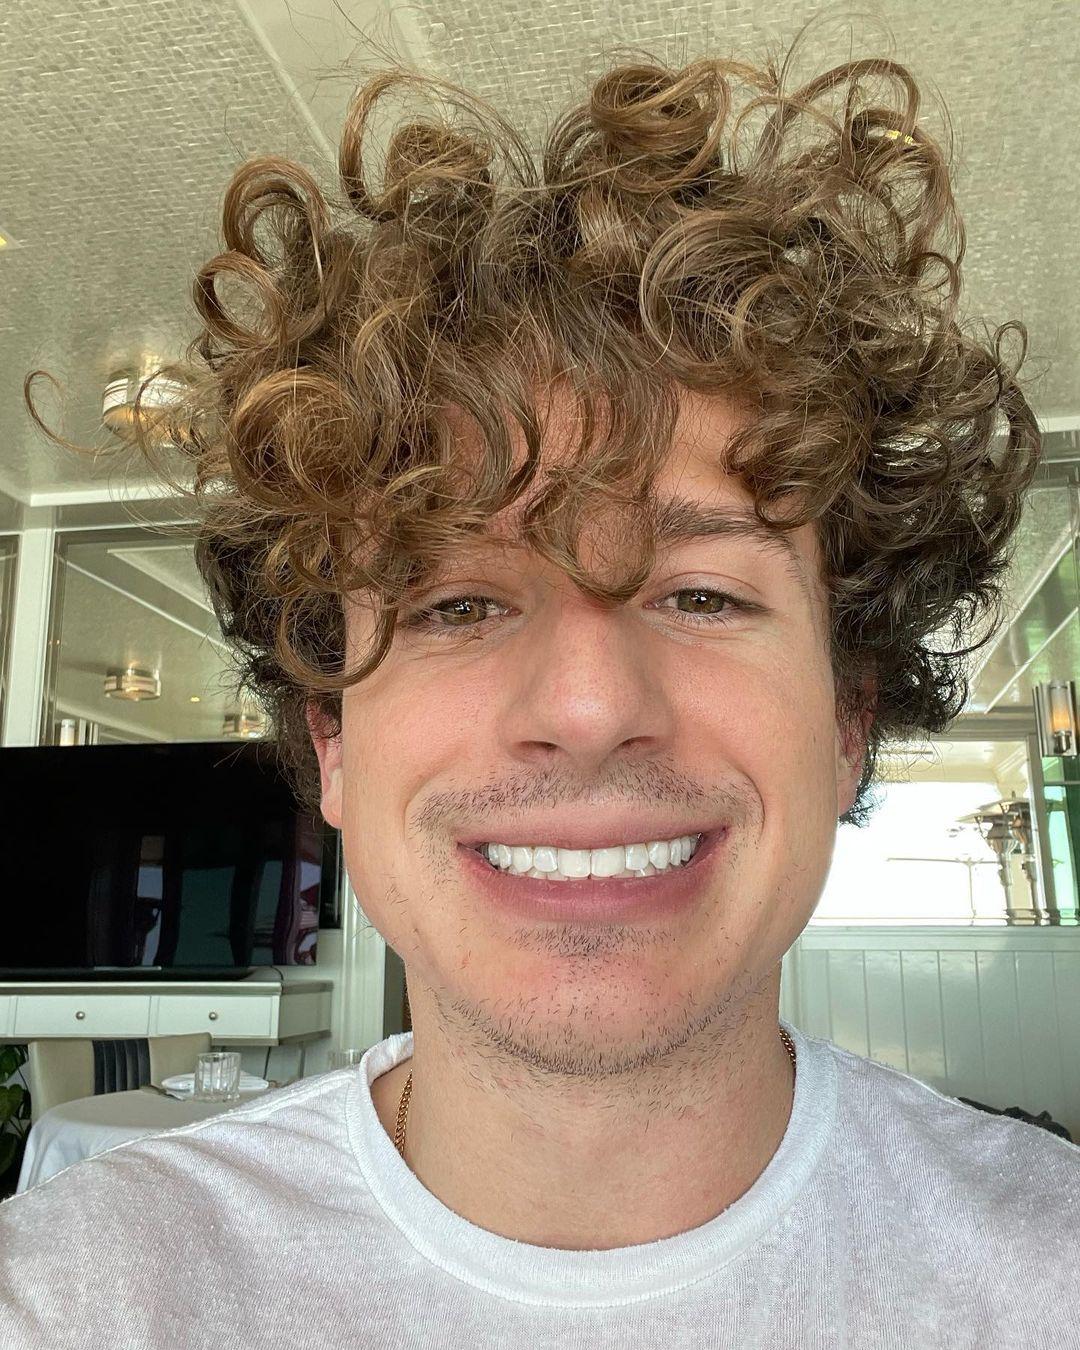 Charlie Puth smiles for his fans